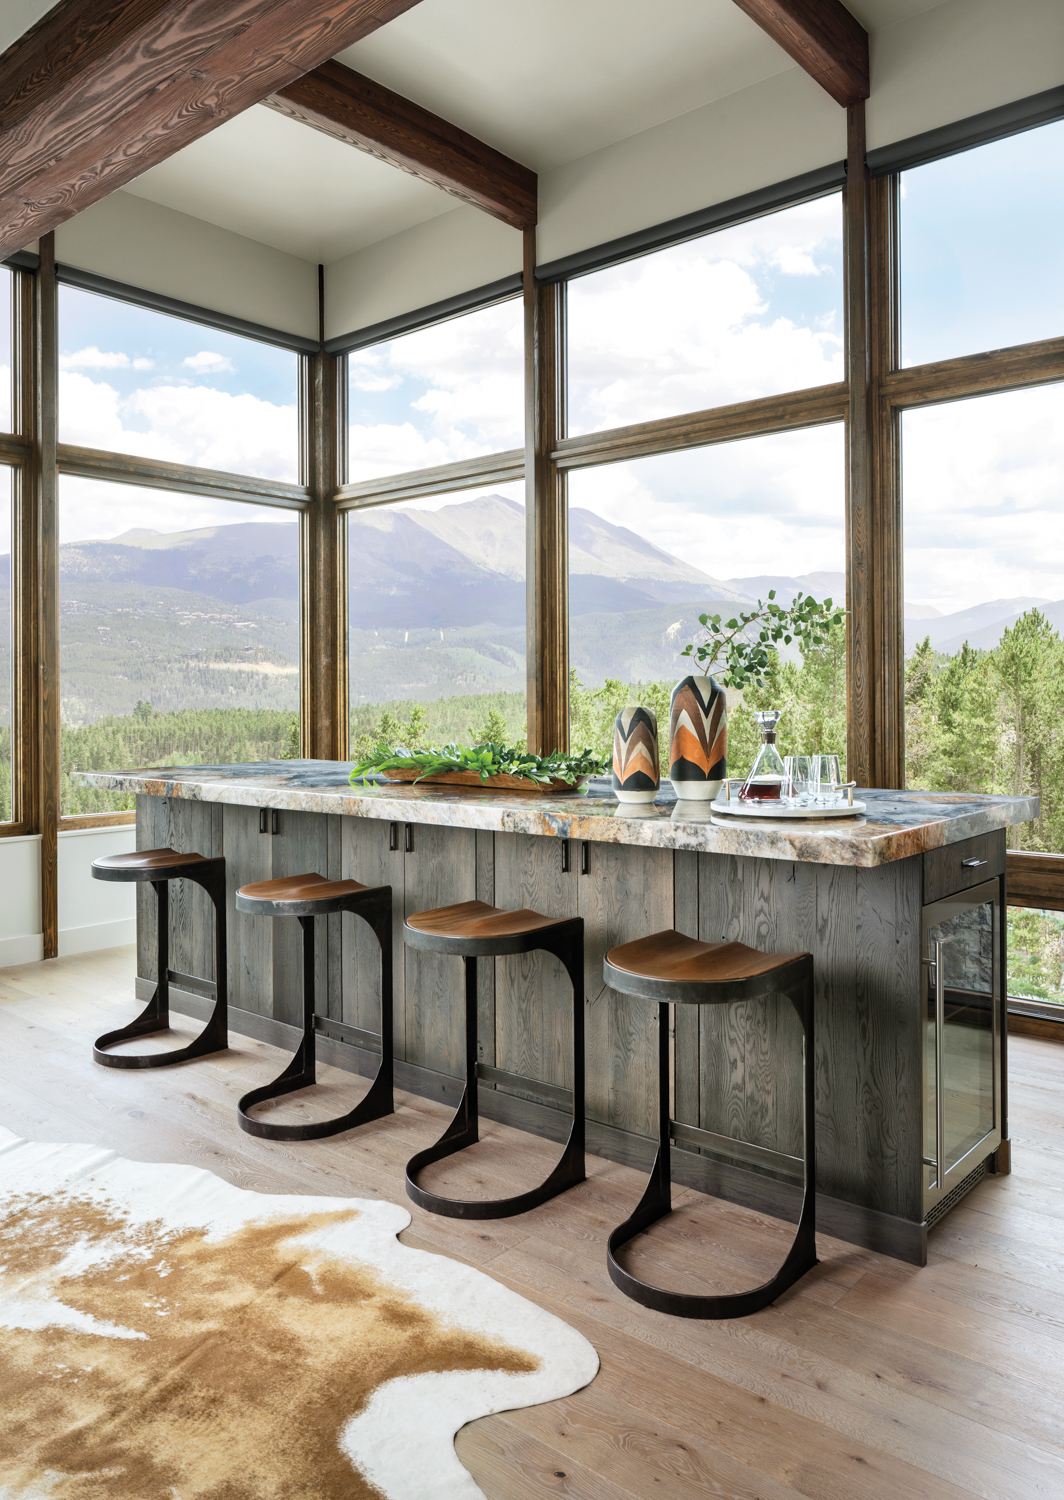 bar seating with white oak wood island against a wall of windows showing mountain views